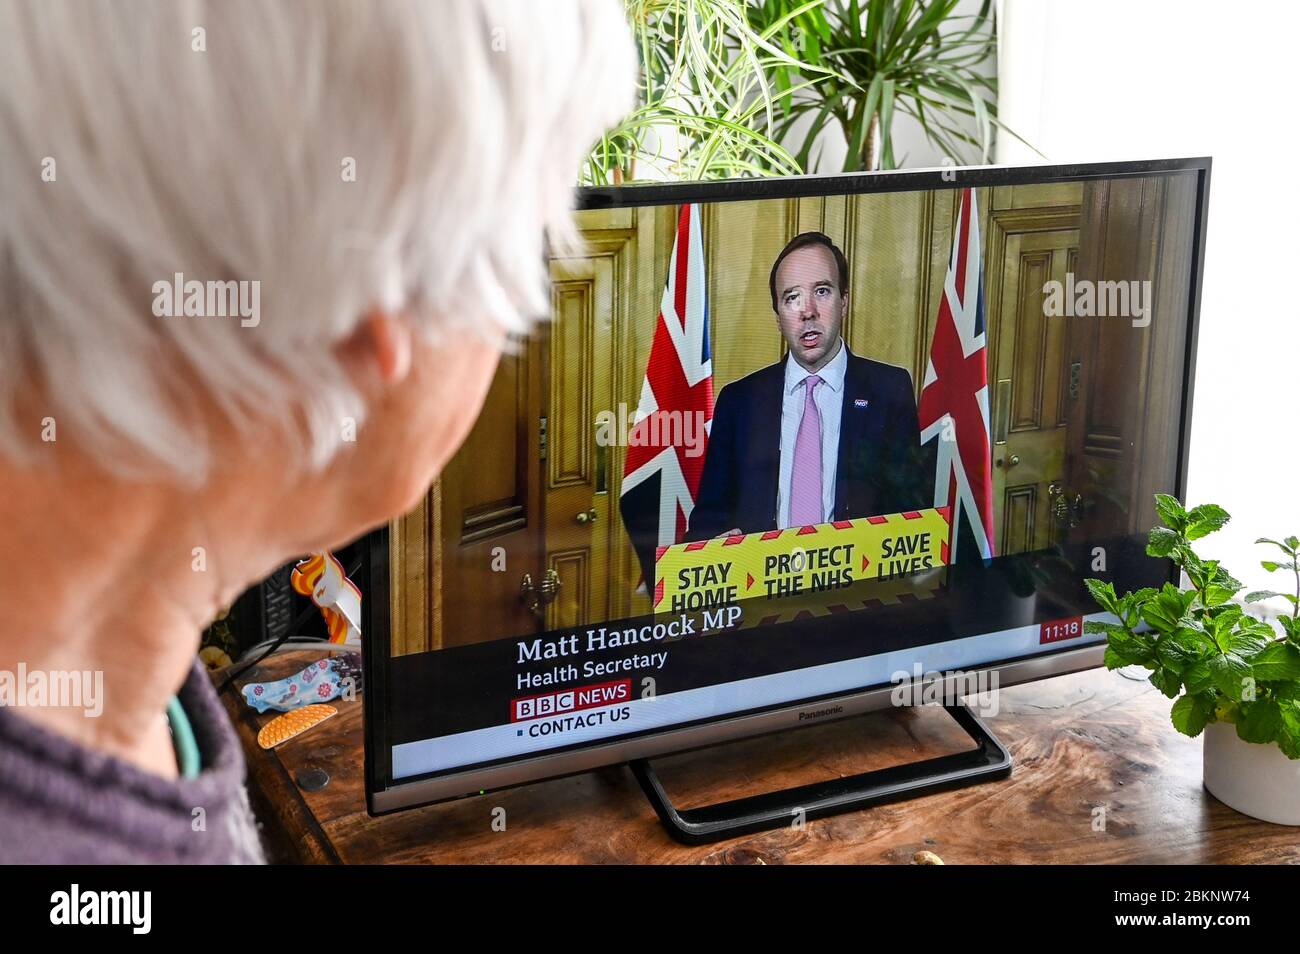 Matt Hancock, Sec of Health, giving the daily televised government Covid-19 press conference watched by a viewer. Stock Photo